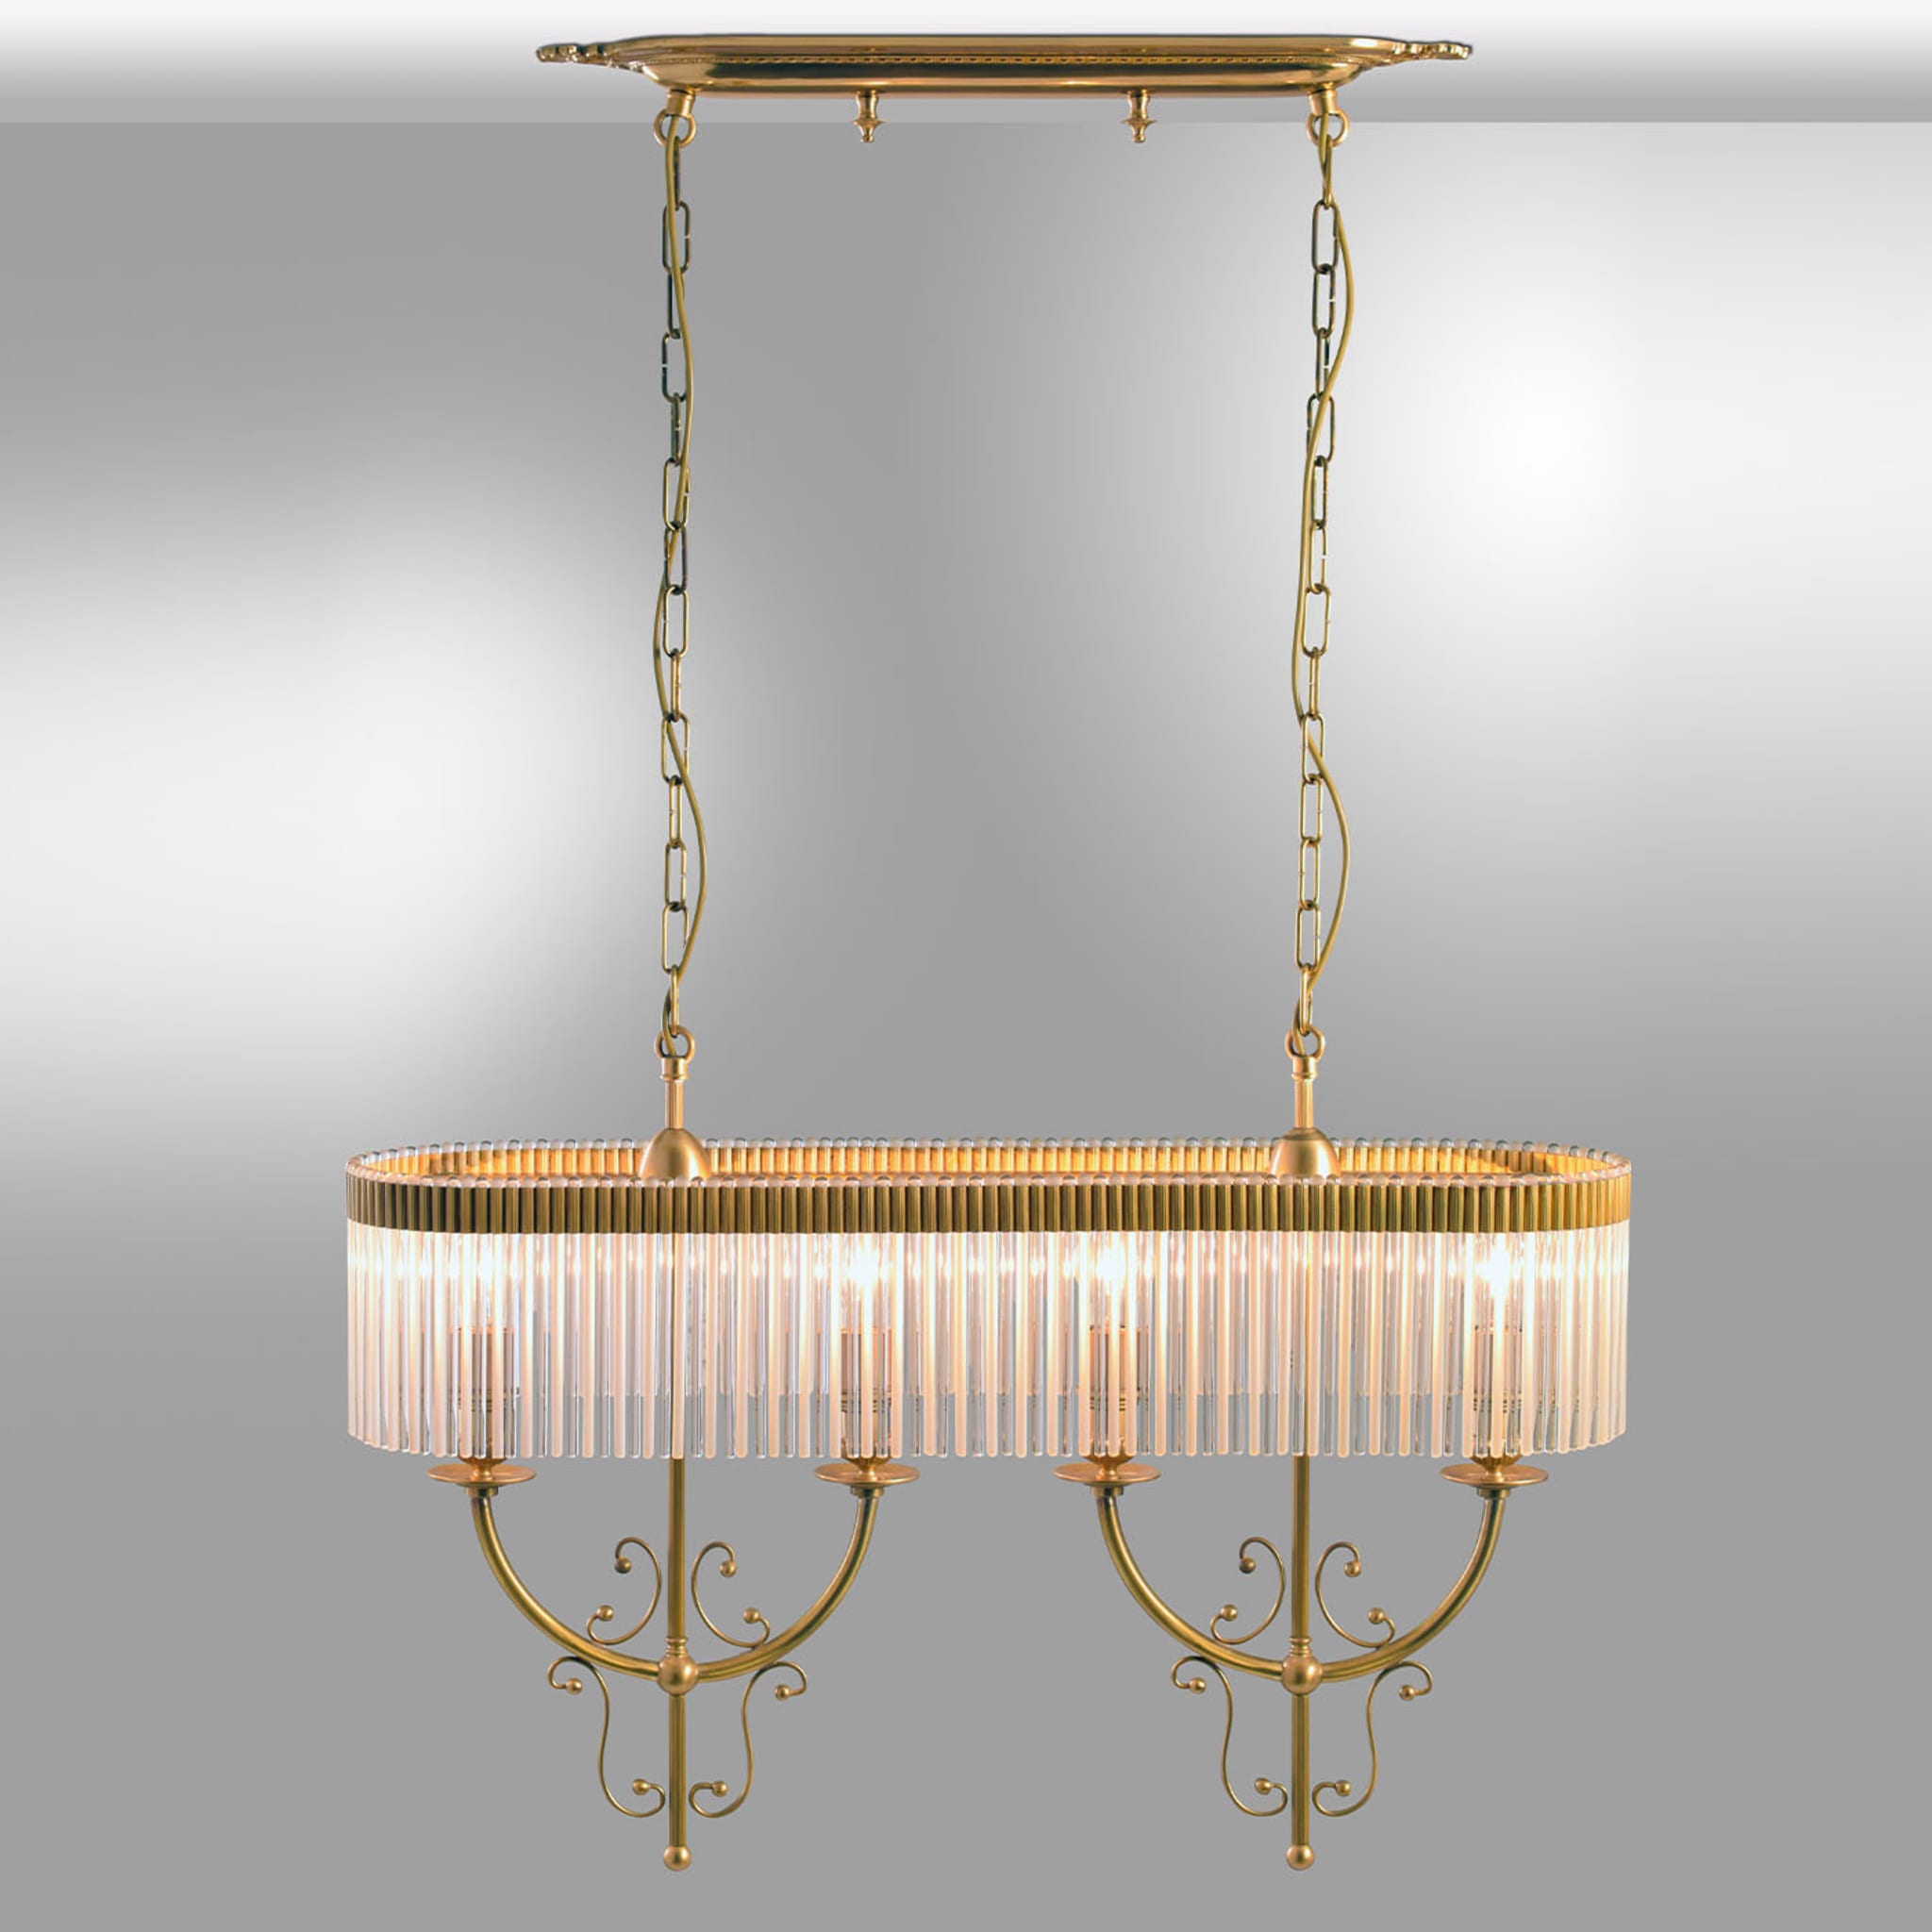 Seicento 4-Light Chandelier by Luca Bussacchini - Alternative view 1